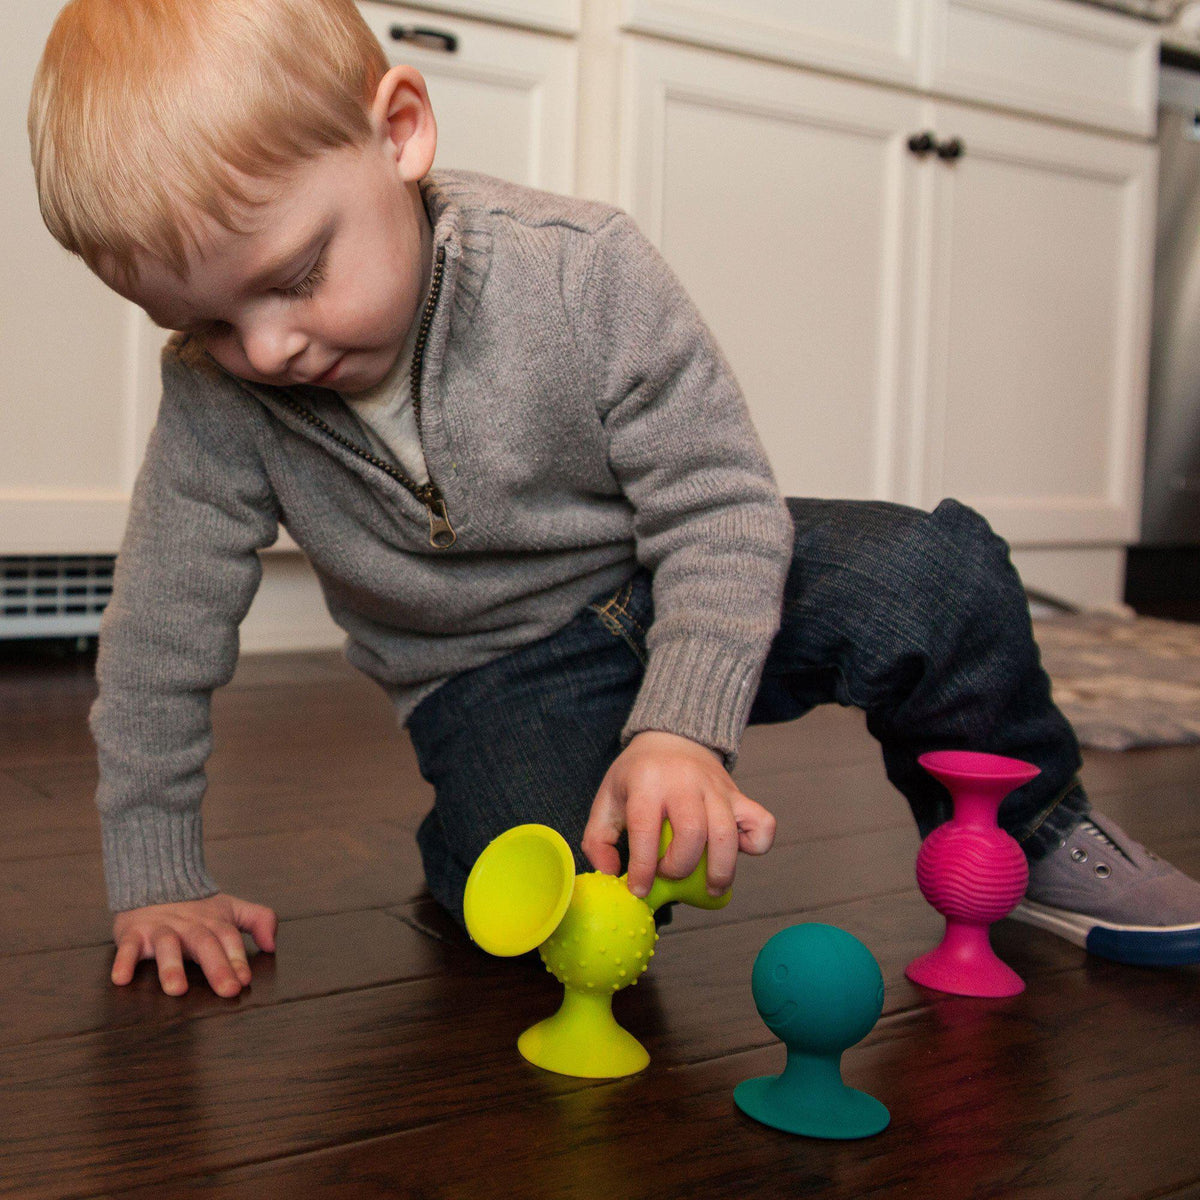 A red headed toddler playing with pipSquigs that are suctioned onto a wooden floor.